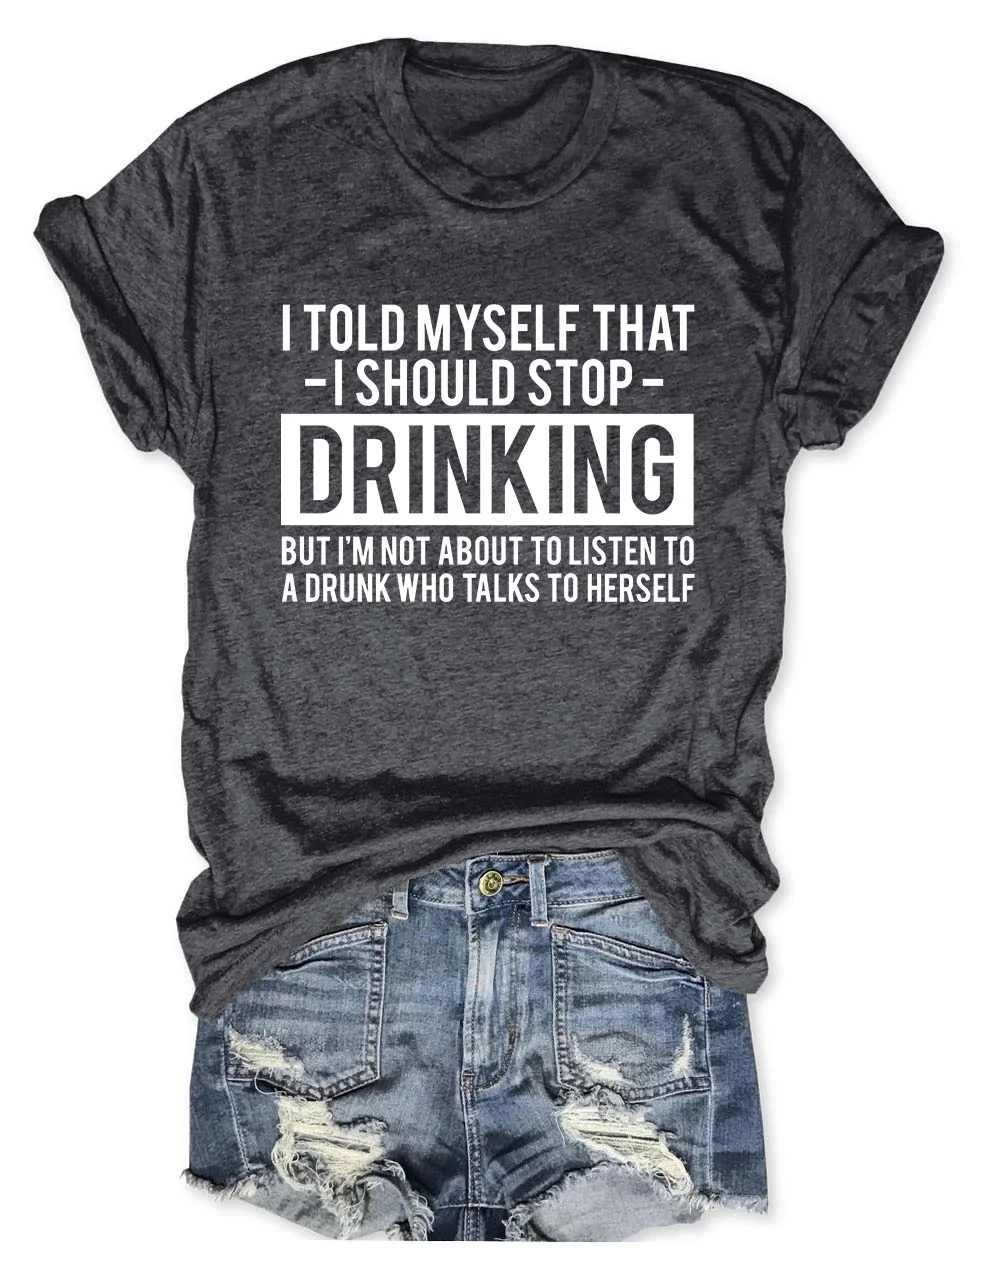 I Told Myself That I Should Stop Drinking T-Shirt